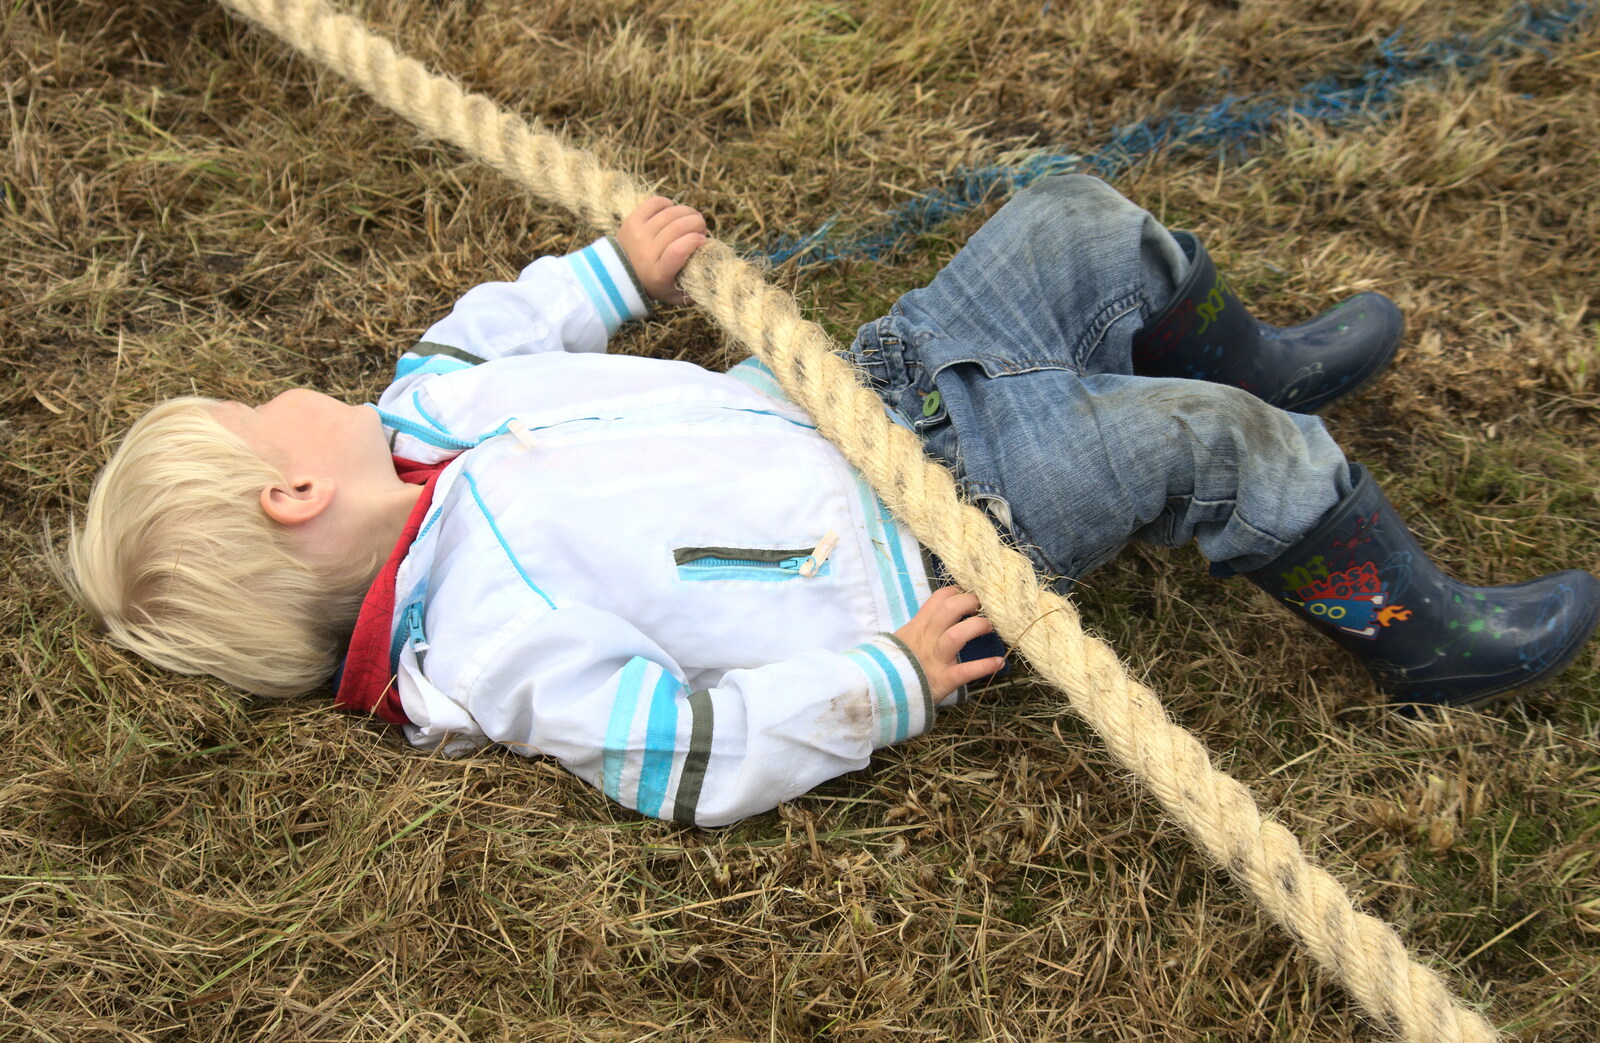 Harry is pinned under the rope from Thrandeston Pig, Little Green, Thrandeston, Suffolk - 29th June 2014